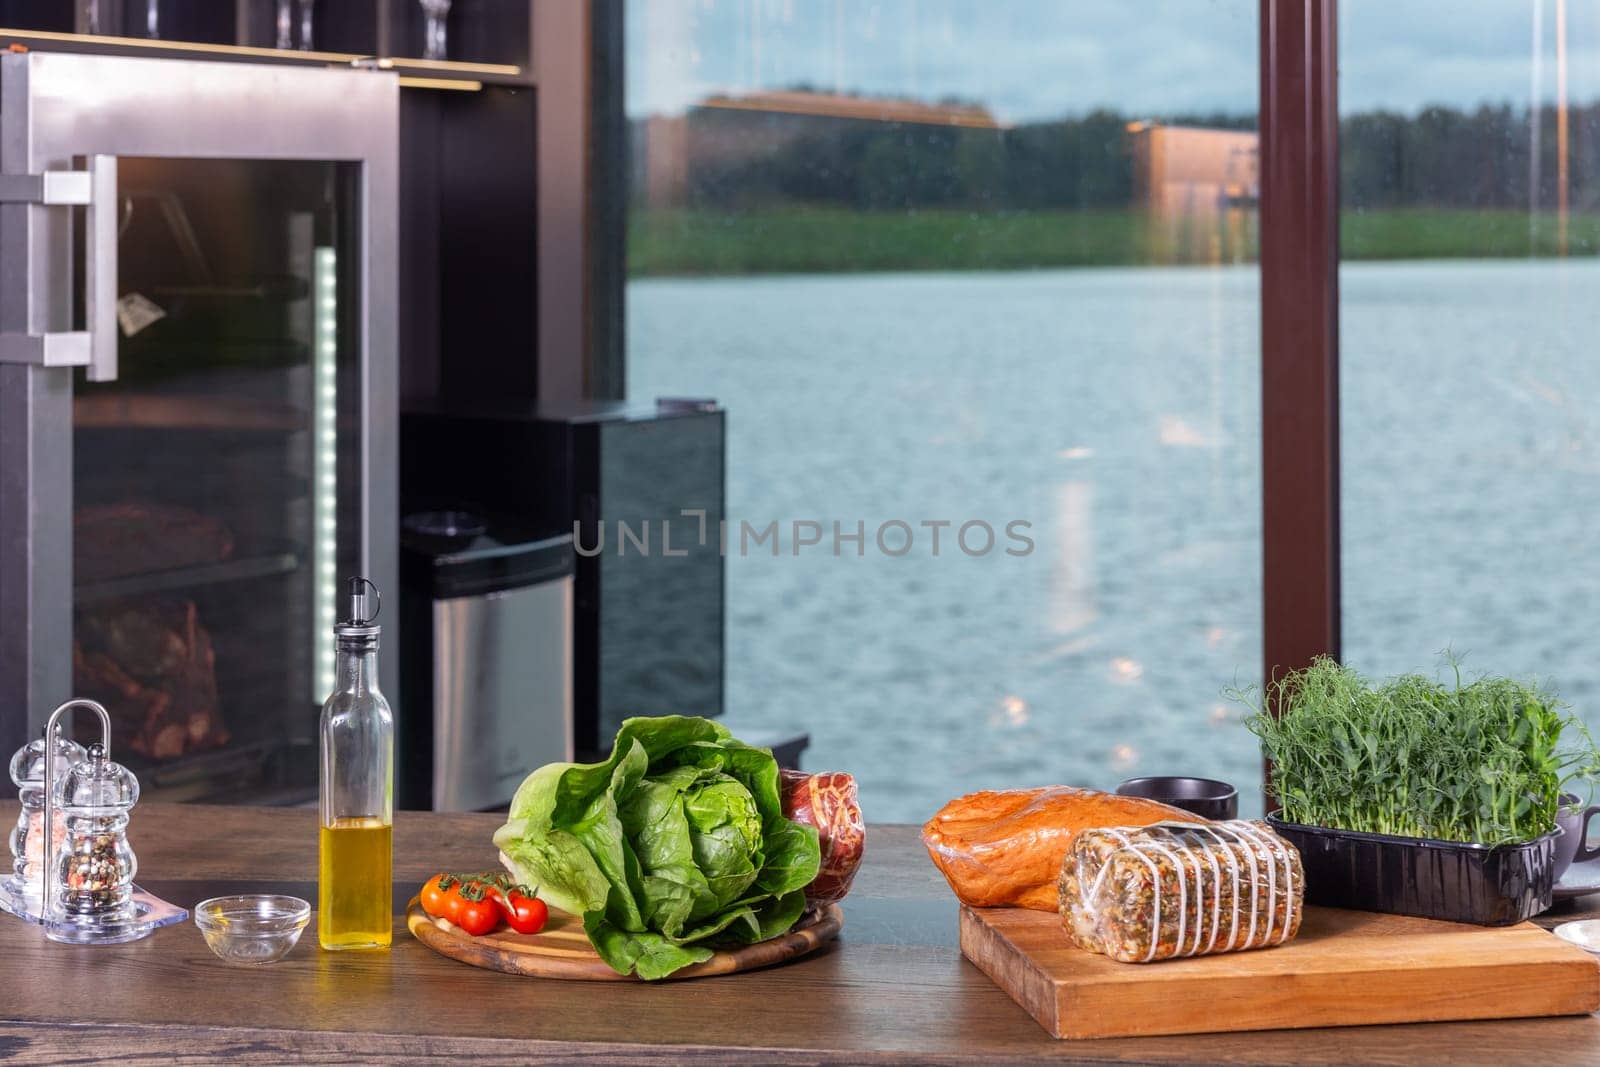 Fresh ingredients for cooking snacks on table. The interior of a modern kitchen with a transparent wall, behind which the surface of the lake is visible.